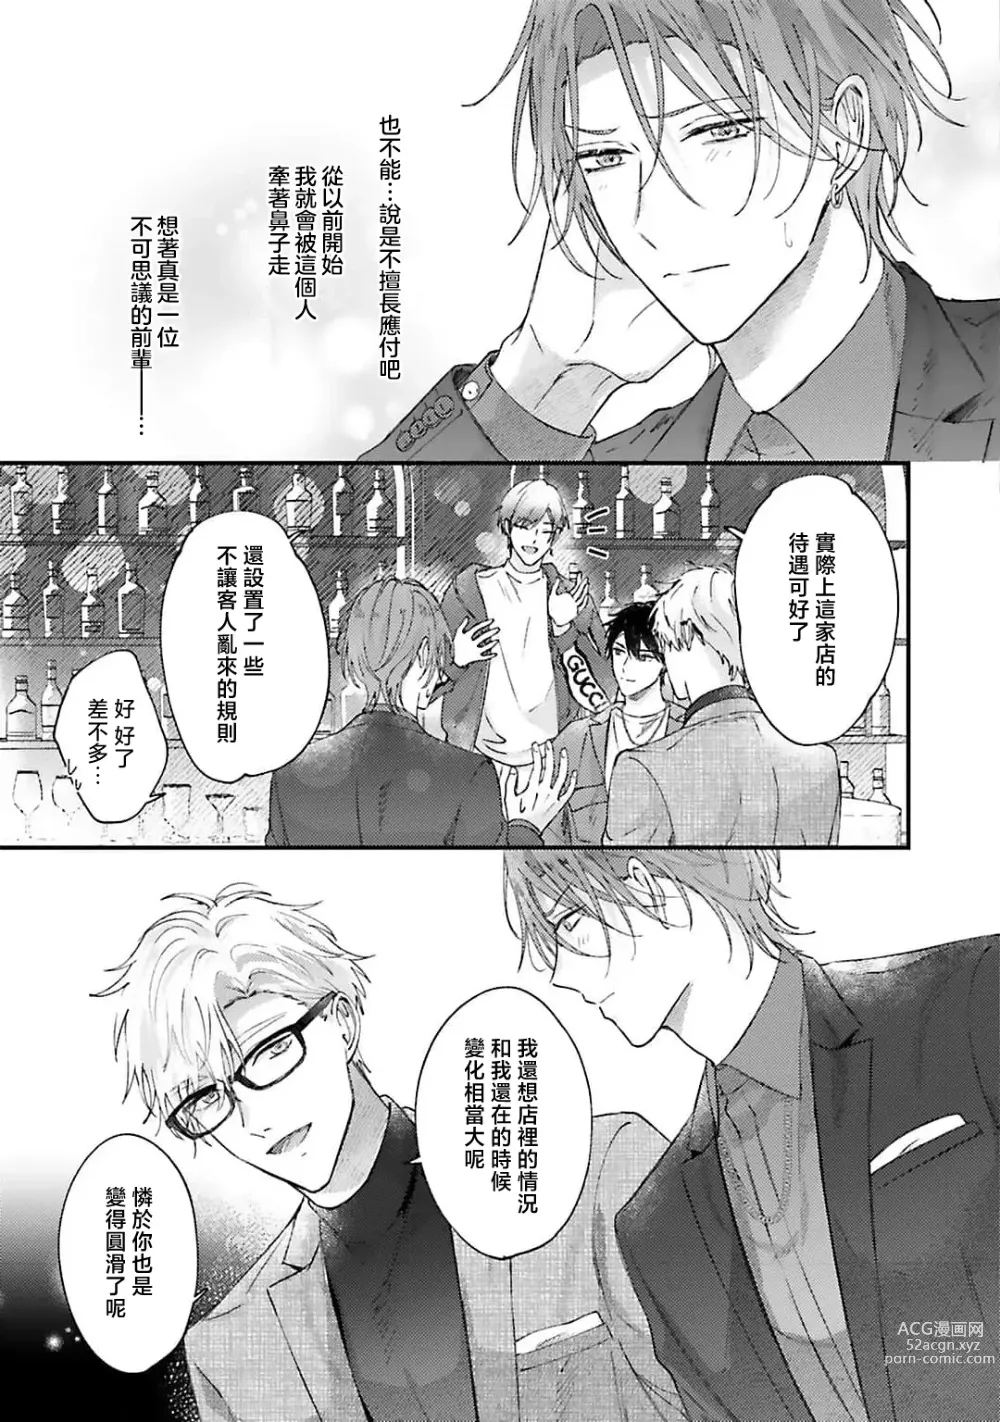 Page 19 of manga 开始当爸爸的两人 another 1